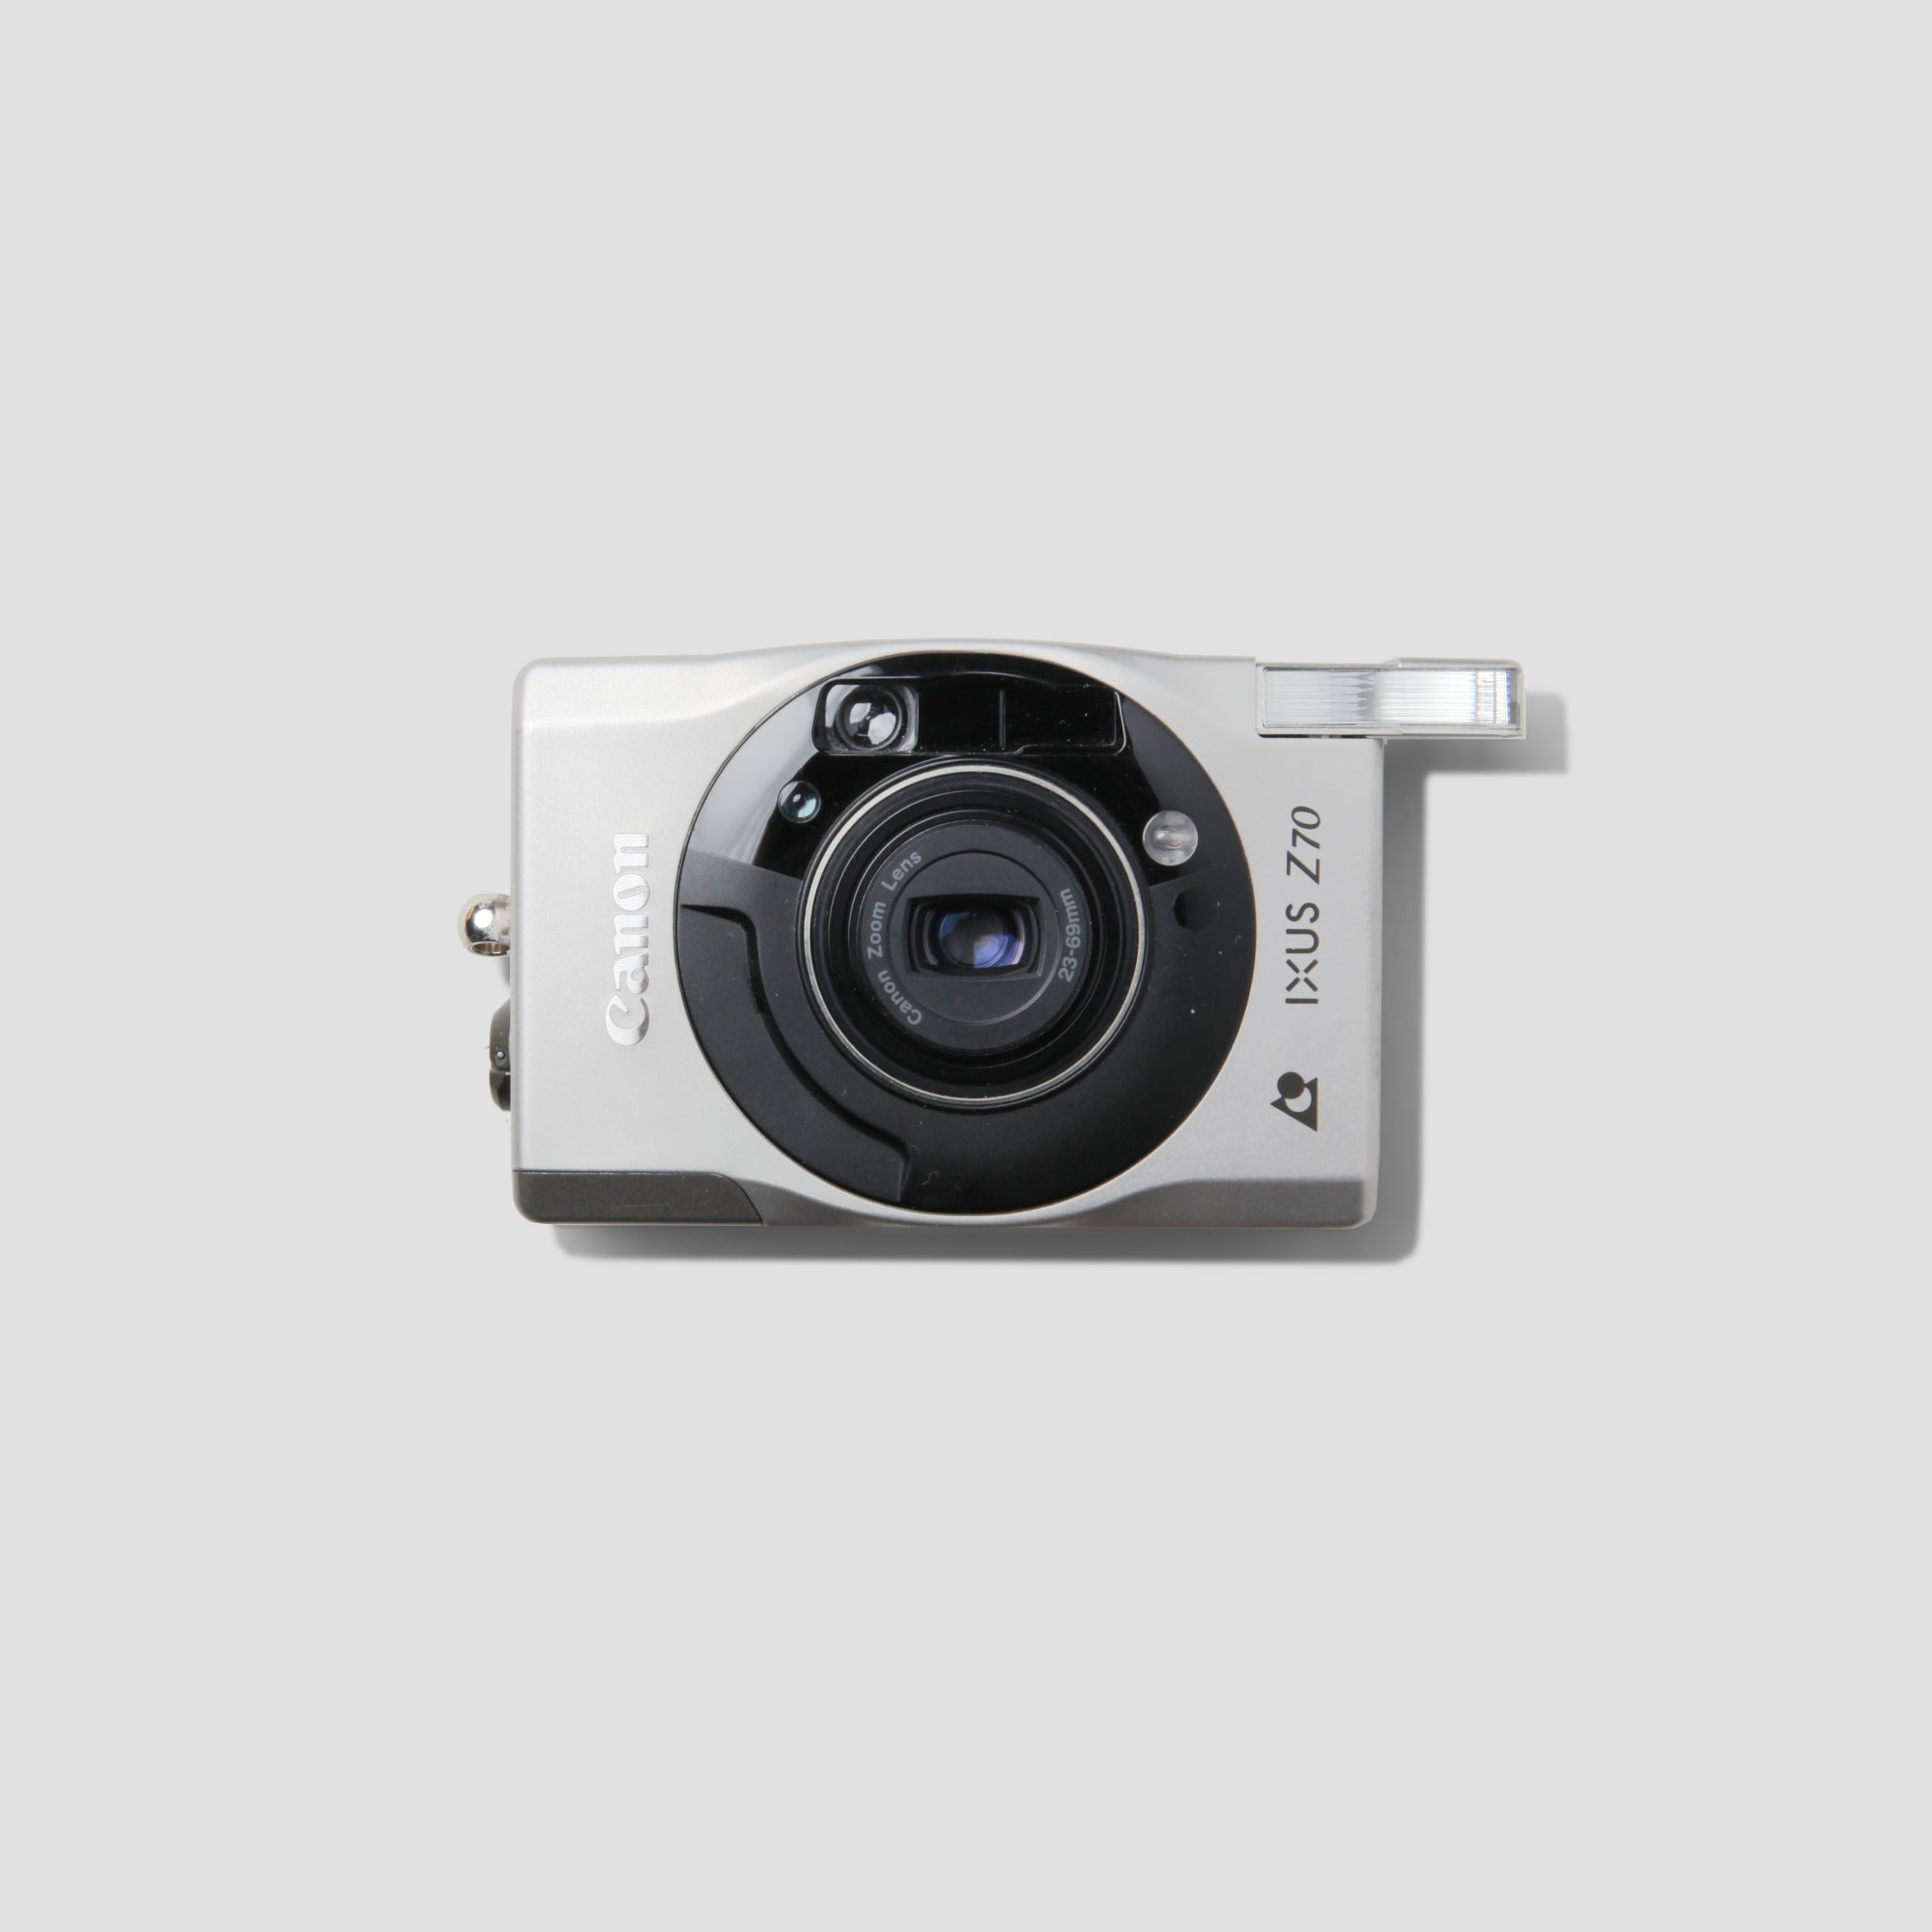 Buy Canon Ixus z70 now at Analogue Amsterdam